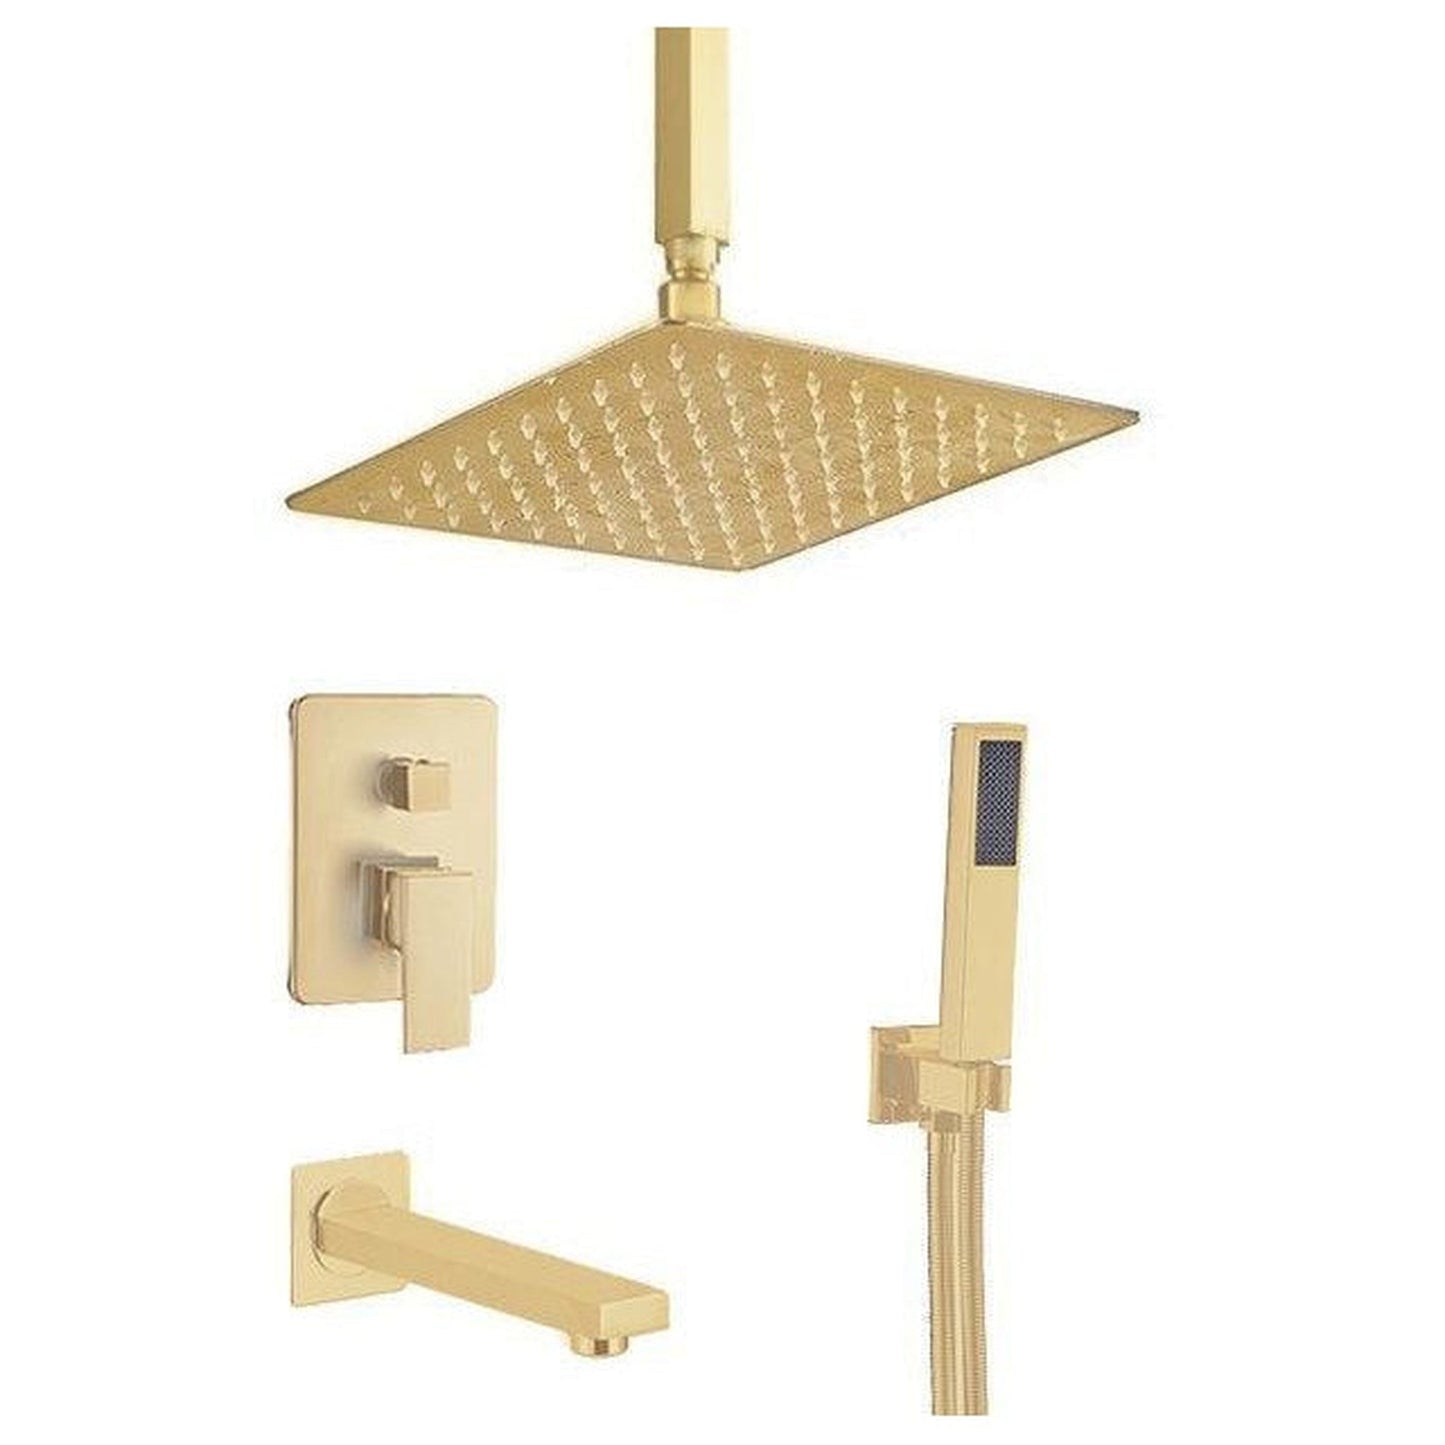 FontanaShowers Verona Creative Luxury 10" Gold Square Ceiling Mounted 3-Way Single Handle Mixer Shower System With Hand Shower and Tub Spout